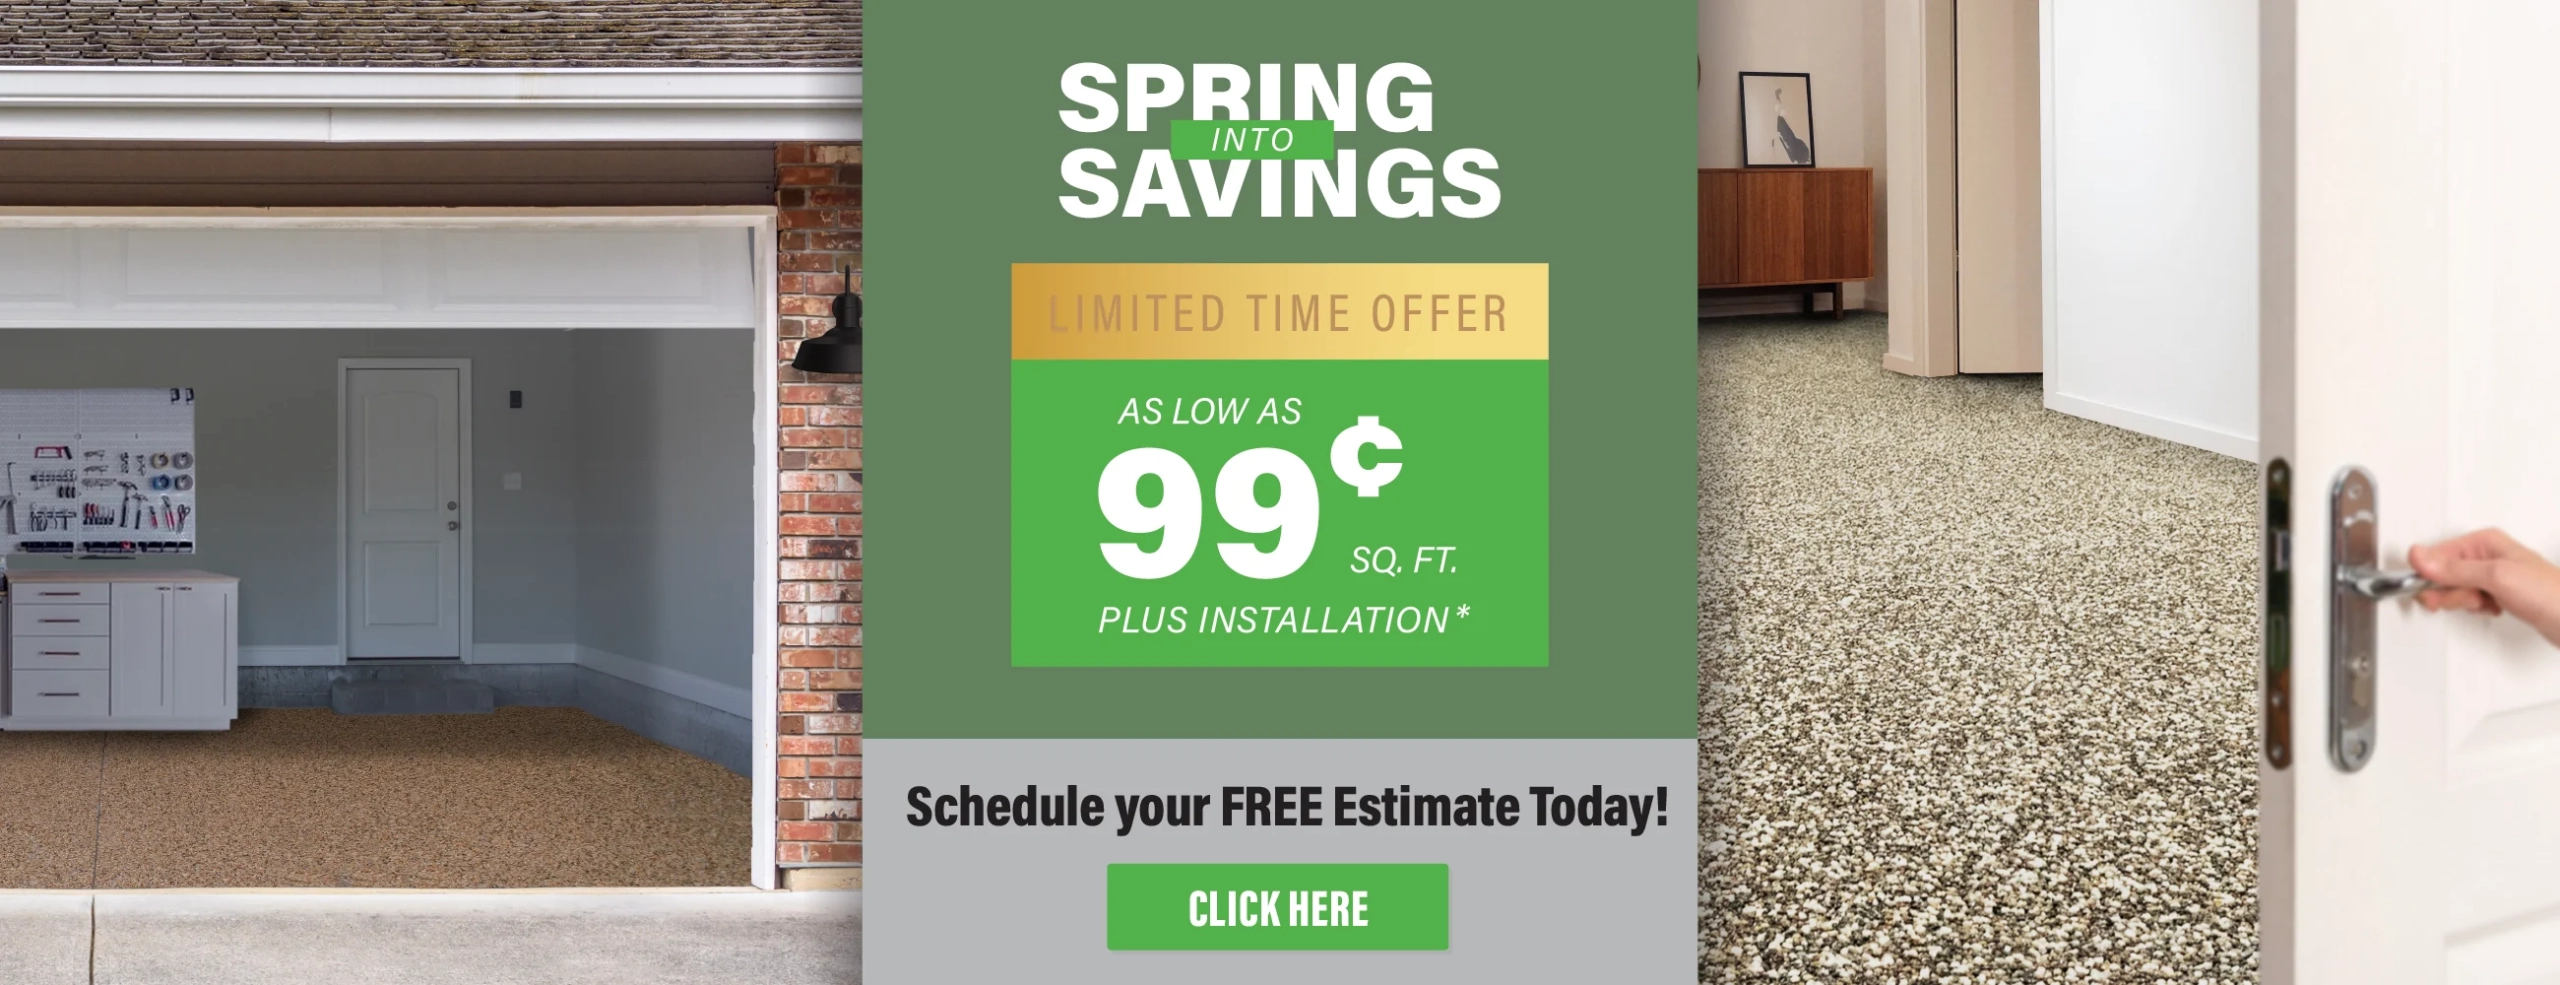 As Low As $1.99 sq. ft. Schedule Your Free Cost Estimate Today!